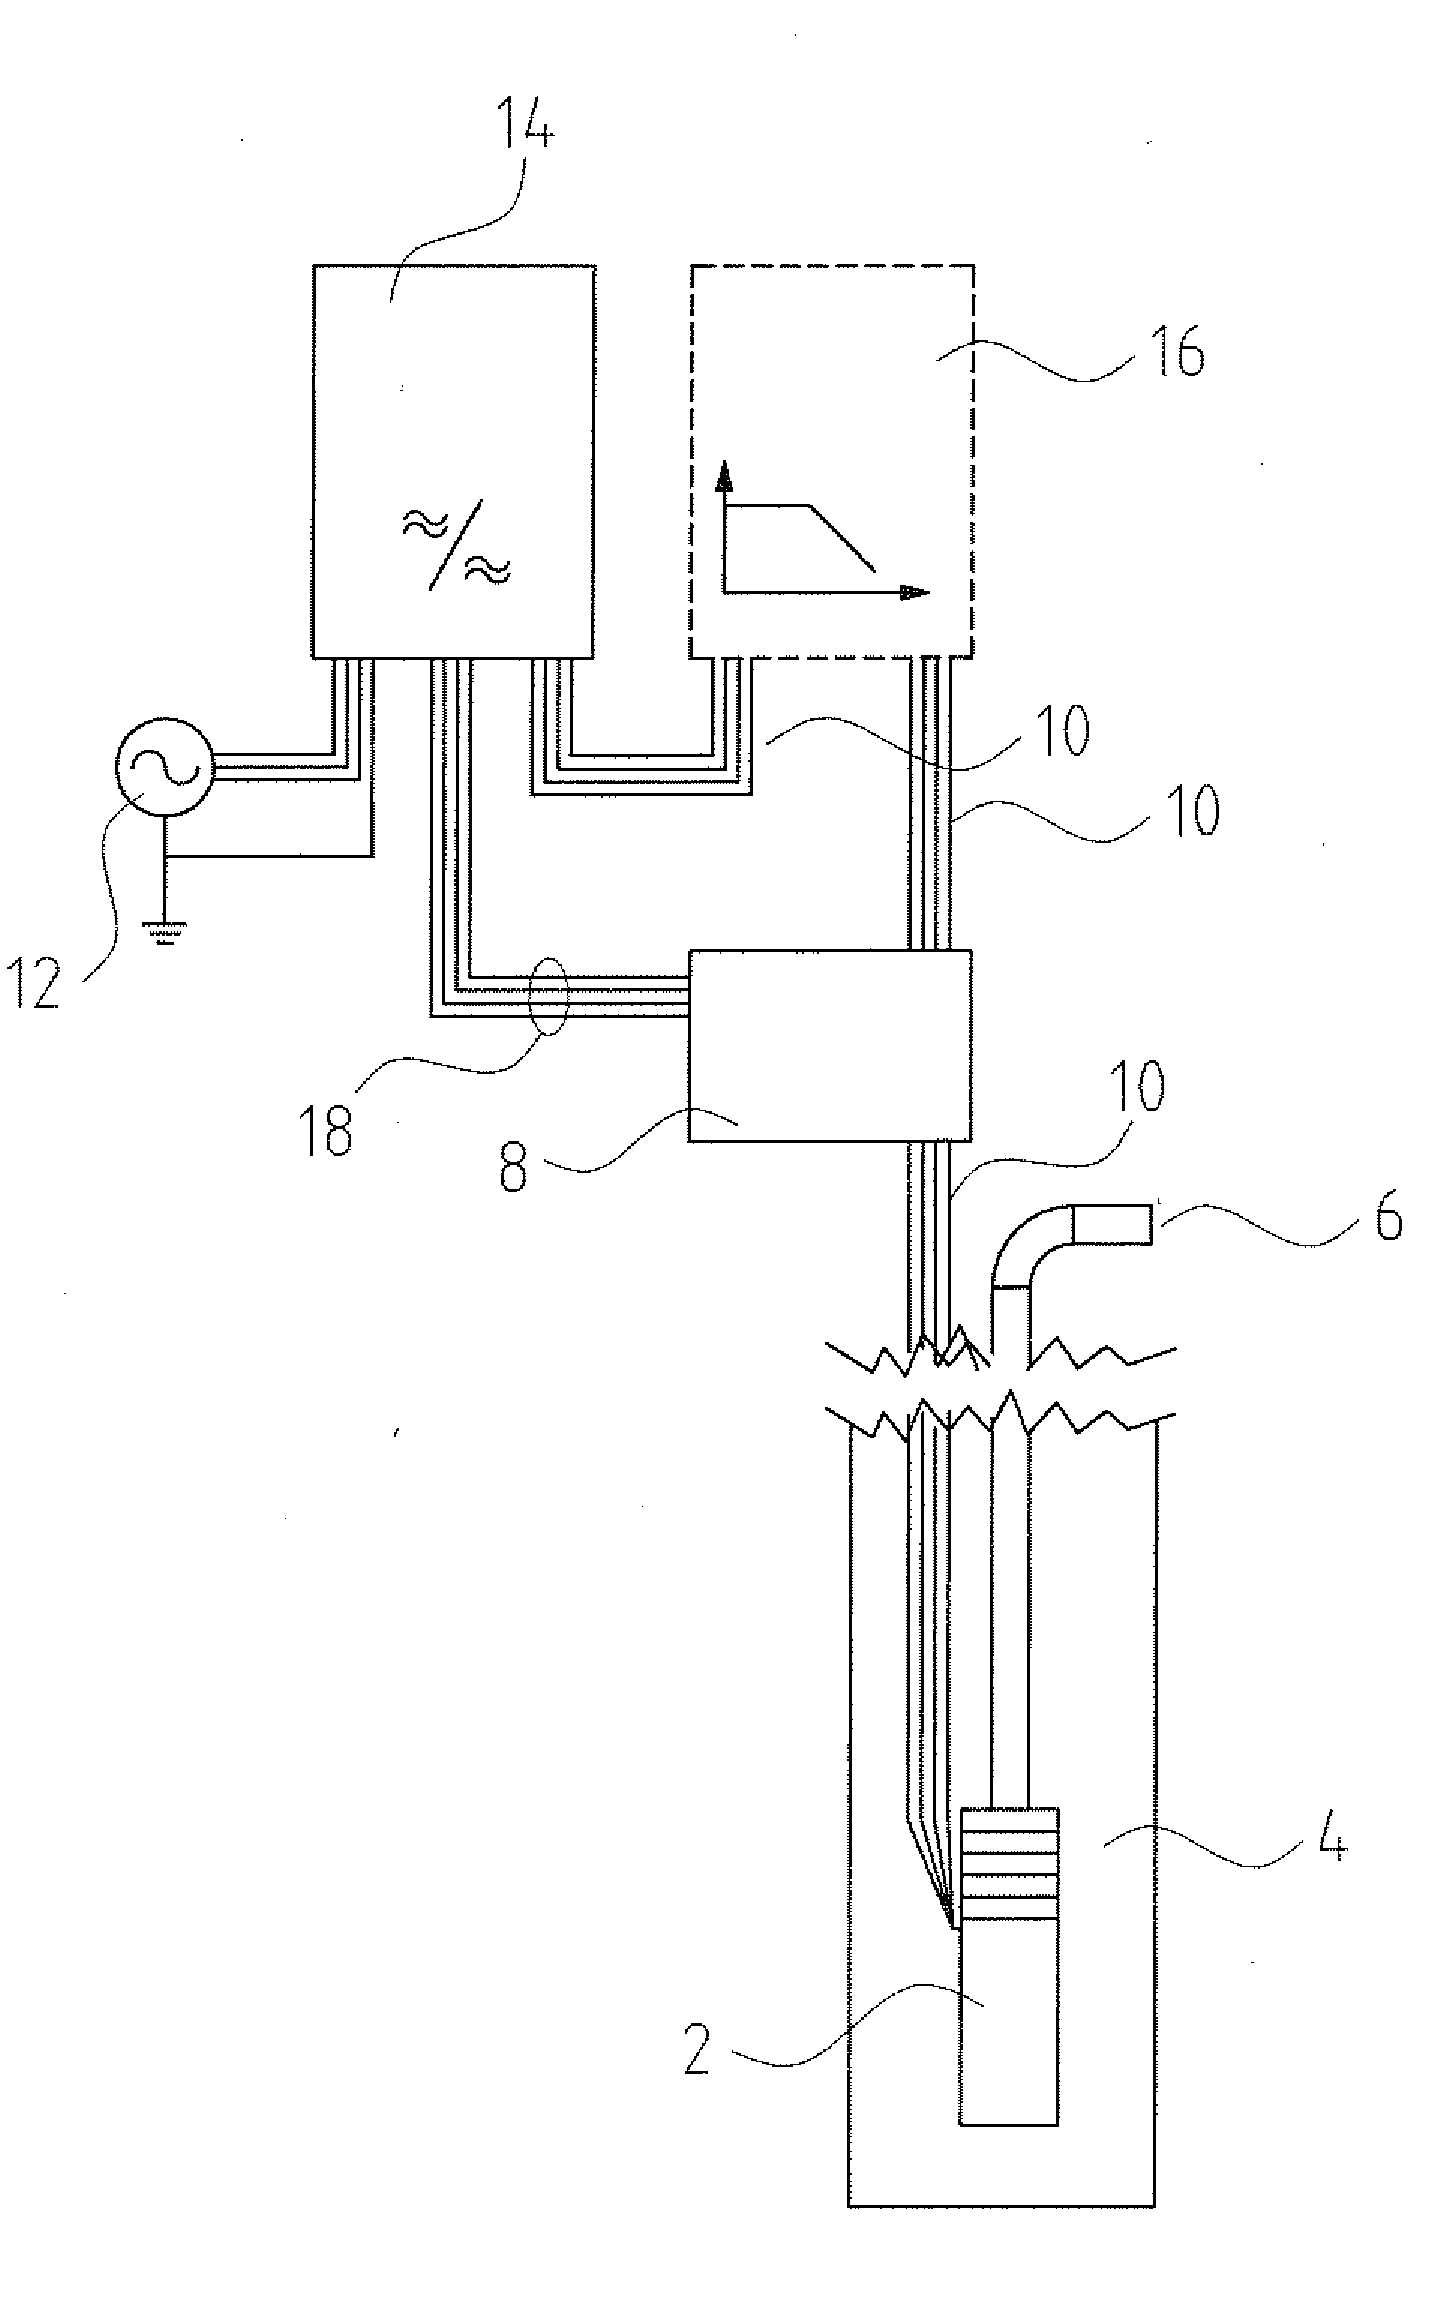 Method for data transmission between a pump assembly and a control device, as well as a correspondingly designed pump system